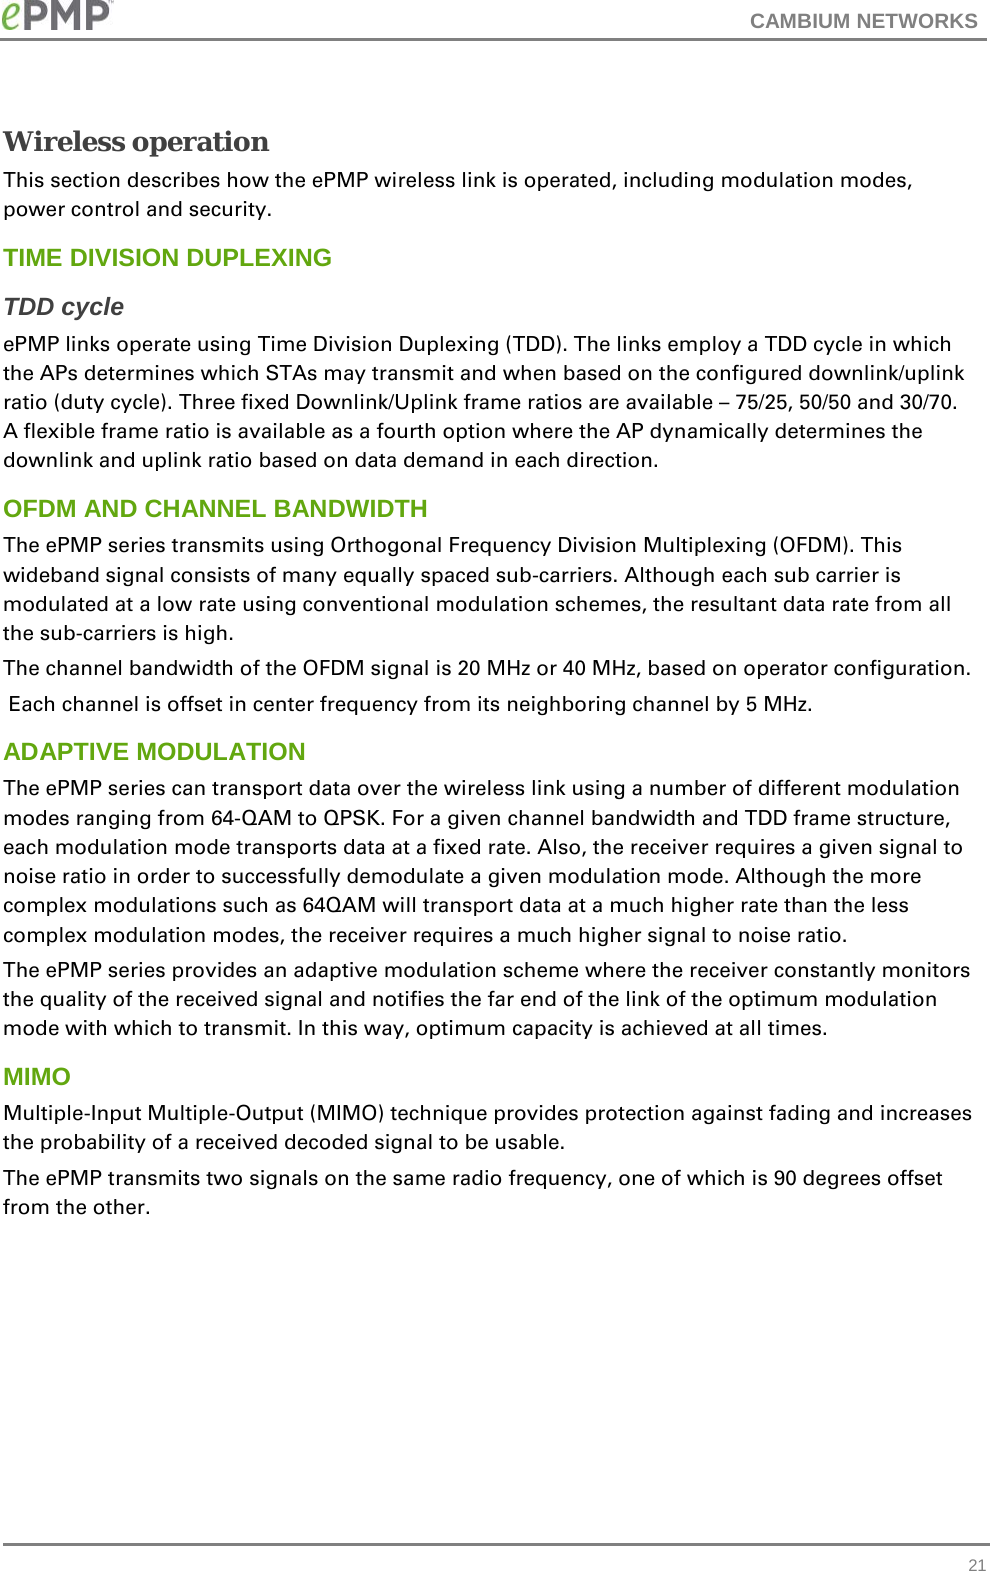 CAMBIUM NETWORKS  Wireless operation This section describes how the ePMP wireless link is operated, including modulation modes, power control and security. TIME DIVISION DUPLEXING TDD cycle ePMP links operate using Time Division Duplexing (TDD). The links employ a TDD cycle in which the APs determines which STAs may transmit and when based on the configured downlink/uplink ratio (duty cycle). Three fixed Downlink/Uplink frame ratios are available – 75/25, 50/50 and 30/70. A flexible frame ratio is available as a fourth option where the AP dynamically determines the downlink and uplink ratio based on data demand in each direction.  OFDM AND CHANNEL BANDWIDTH The ePMP series transmits using Orthogonal Frequency Division Multiplexing (OFDM). This wideband signal consists of many equally spaced sub-carriers. Although each sub carrier is modulated at a low rate using conventional modulation schemes, the resultant data rate from all the sub-carriers is high.  The channel bandwidth of the OFDM signal is 20 MHz or 40 MHz, based on operator configuration.  Each channel is offset in center frequency from its neighboring channel by 5 MHz.  ADAPTIVE MODULATION The ePMP series can transport data over the wireless link using a number of different modulation modes ranging from 64-QAM to QPSK. For a given channel bandwidth and TDD frame structure, each modulation mode transports data at a fixed rate. Also, the receiver requires a given signal to noise ratio in order to successfully demodulate a given modulation mode. Although the more complex modulations such as 64QAM will transport data at a much higher rate than the less complex modulation modes, the receiver requires a much higher signal to noise ratio. The ePMP series provides an adaptive modulation scheme where the receiver constantly monitors the quality of the received signal and notifies the far end of the link of the optimum modulation mode with which to transmit. In this way, optimum capacity is achieved at all times.  MIMO Multiple-Input Multiple-Output (MIMO) technique provides protection against fading and increases the probability of a received decoded signal to be usable.  The ePMP transmits two signals on the same radio frequency, one of which is 90 degrees offset from the other.   21 